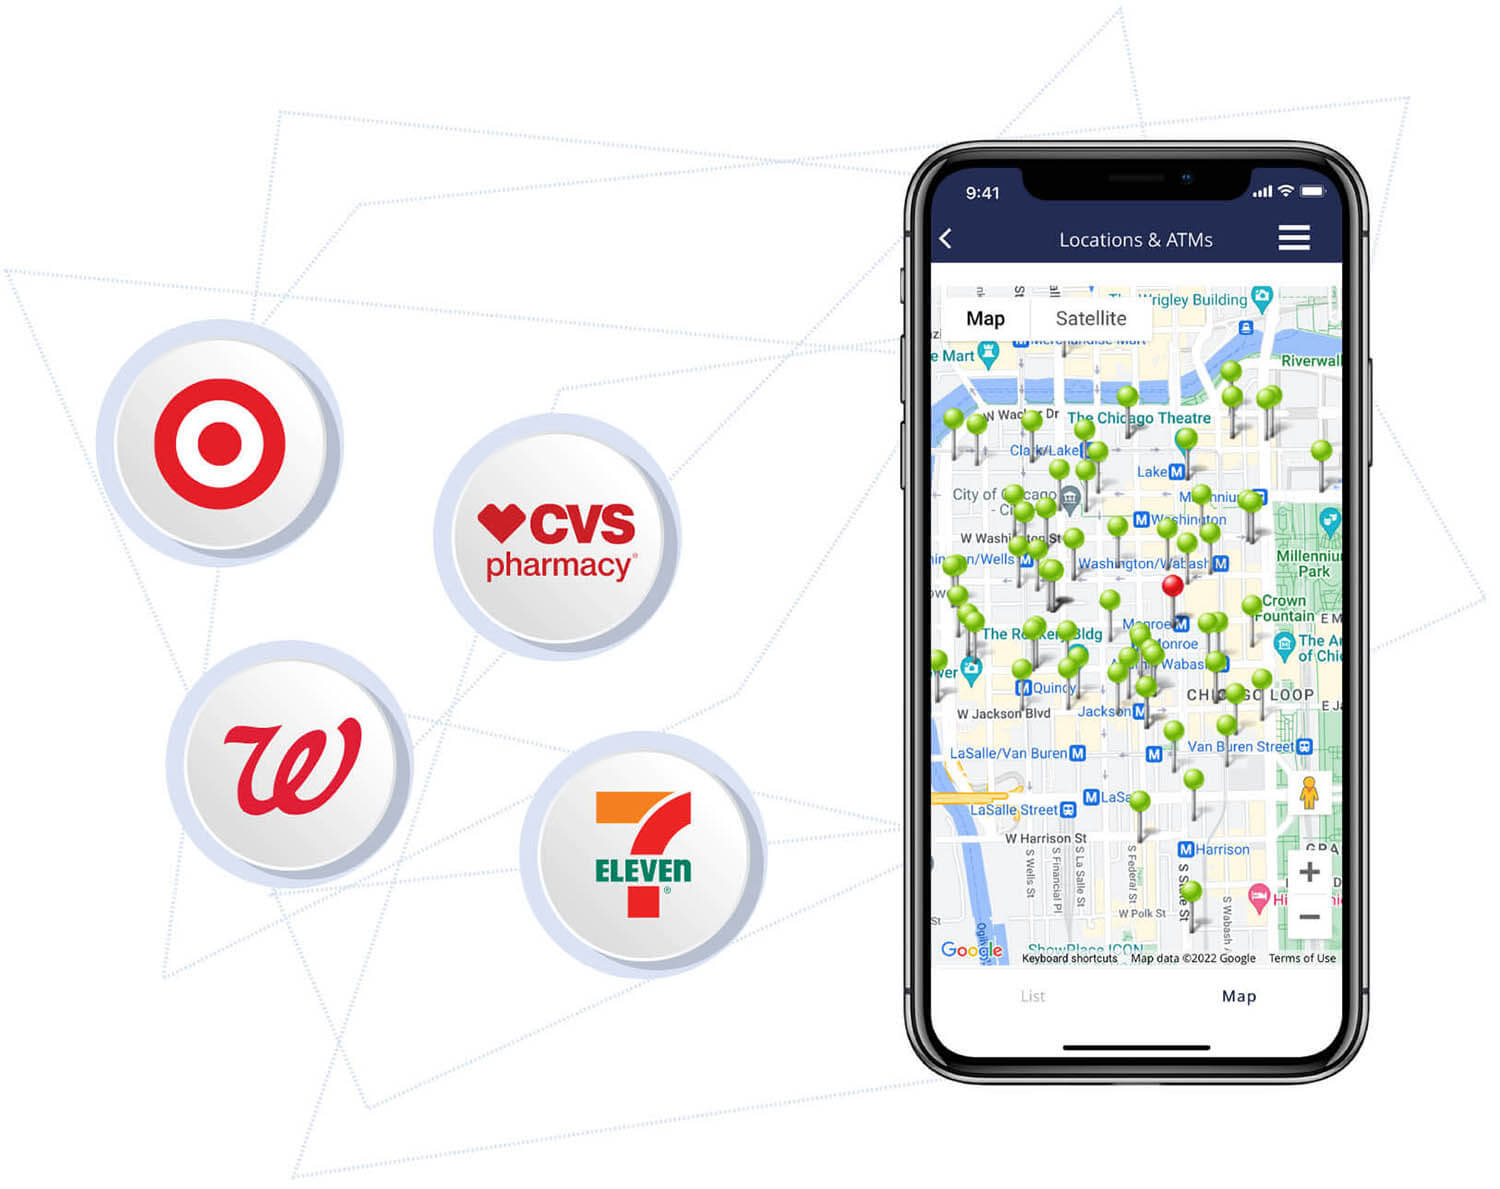 Picture of map on phone with Walmart, CVS, Target, and 7-Eleven connected